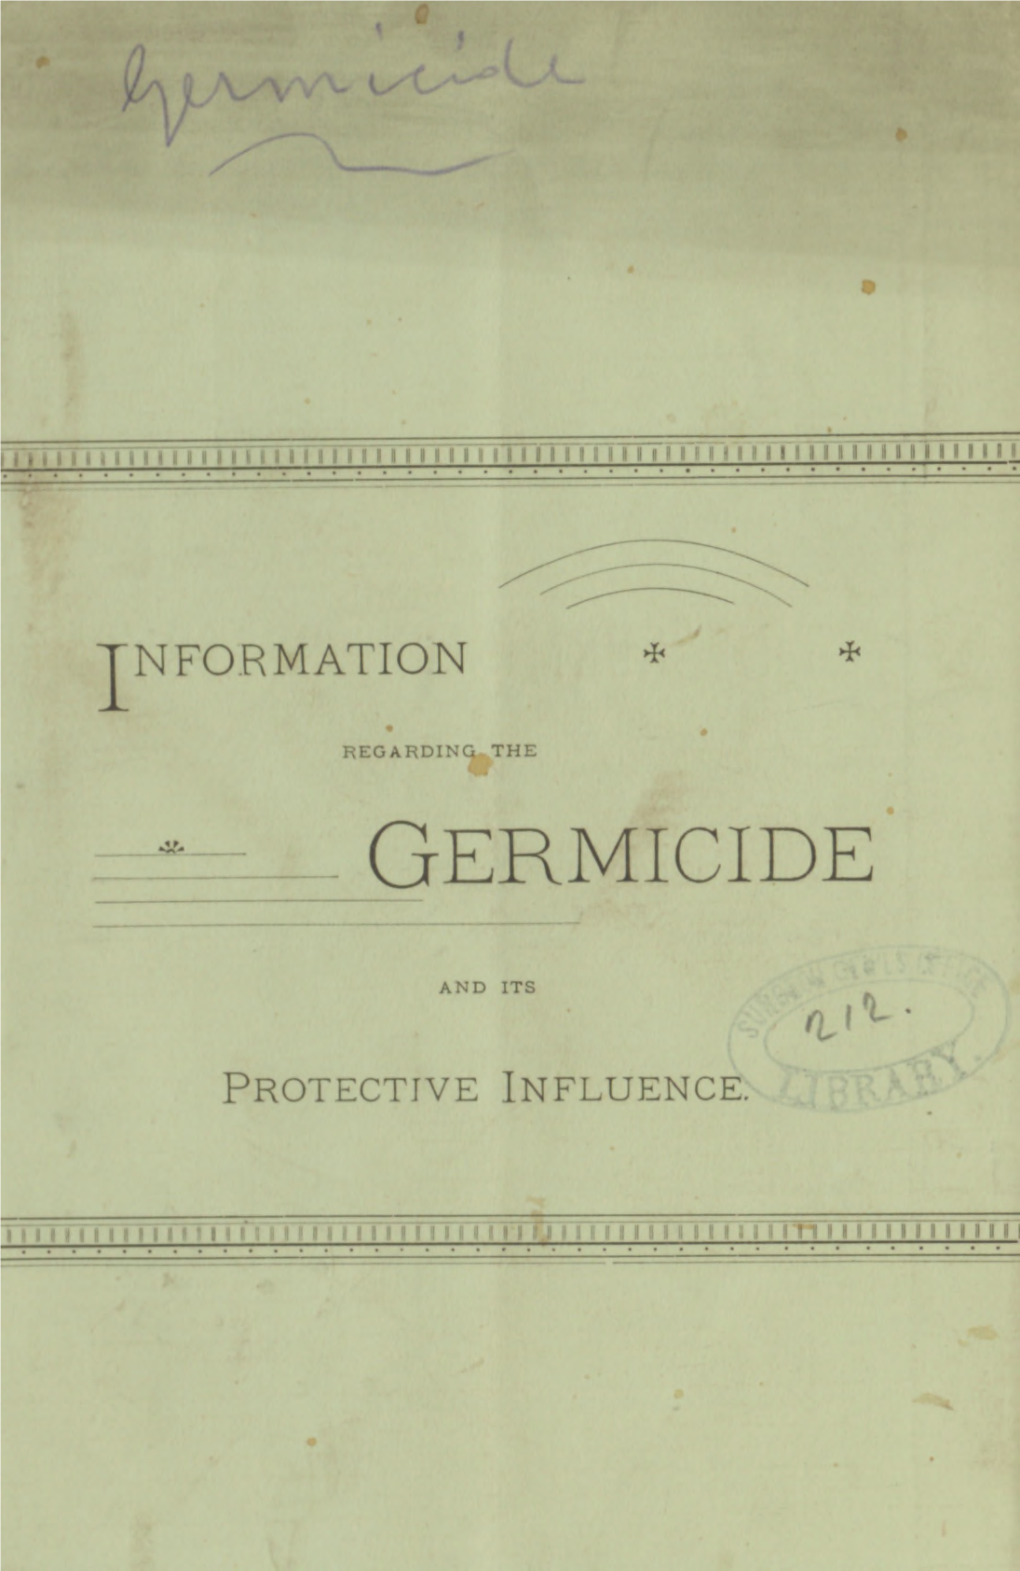 Information Regarding the Germicide and Its Protective Influence